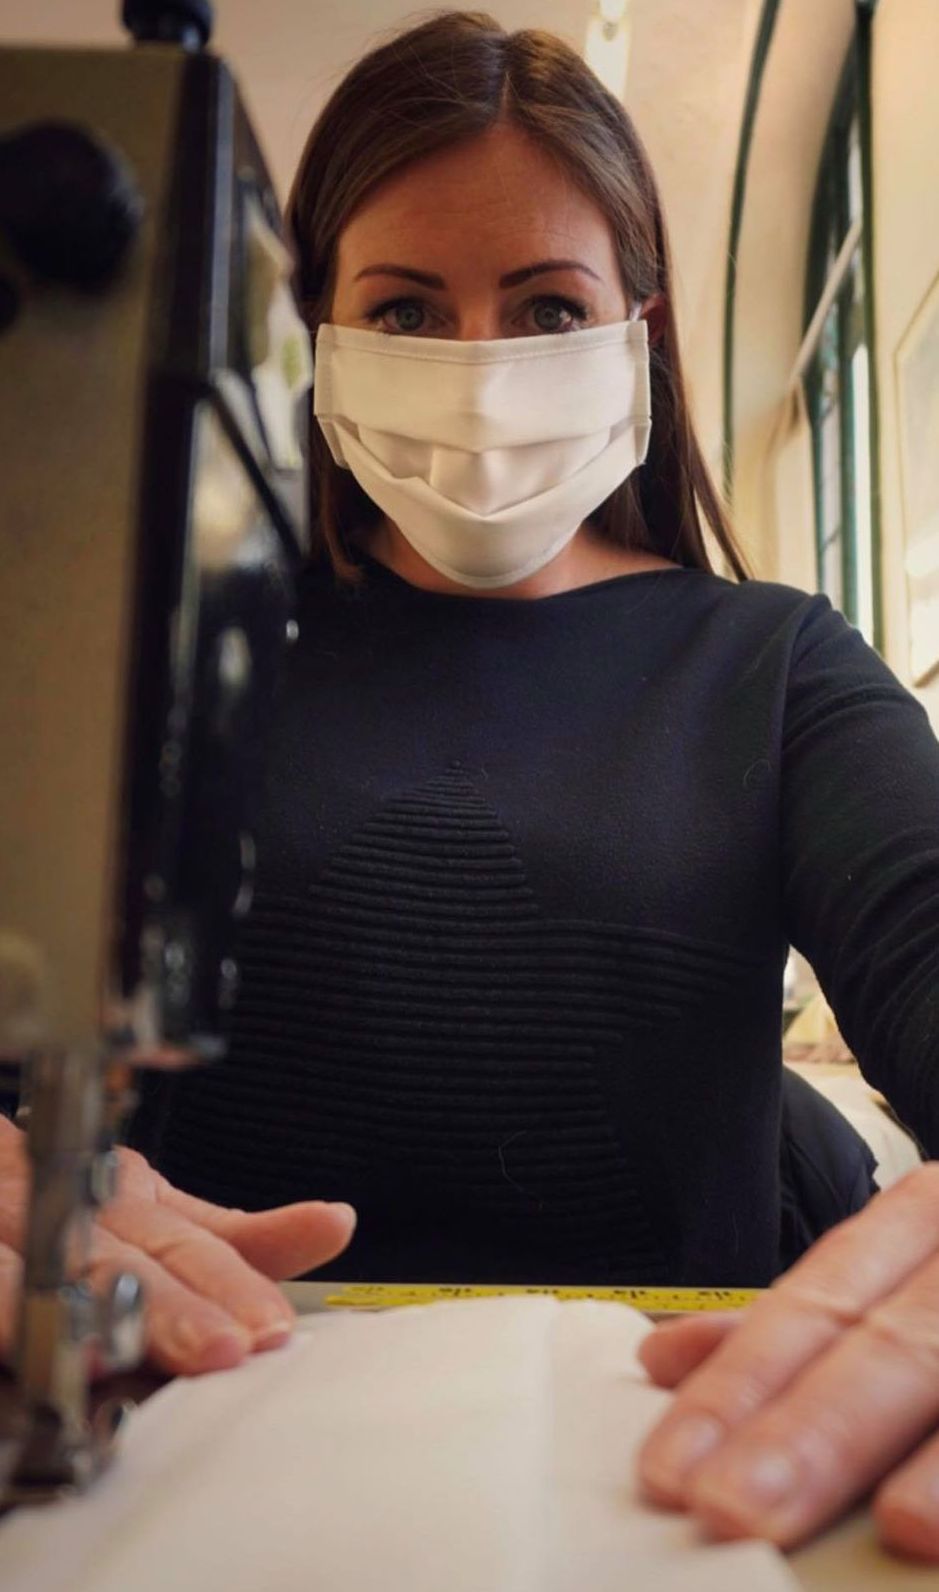 May-Lean & Co Limited is producing thousands of top quality, virus-resistant face masks to keep people safe against Coronavirus. May-Lean & Co Limited director Lindsay Tully